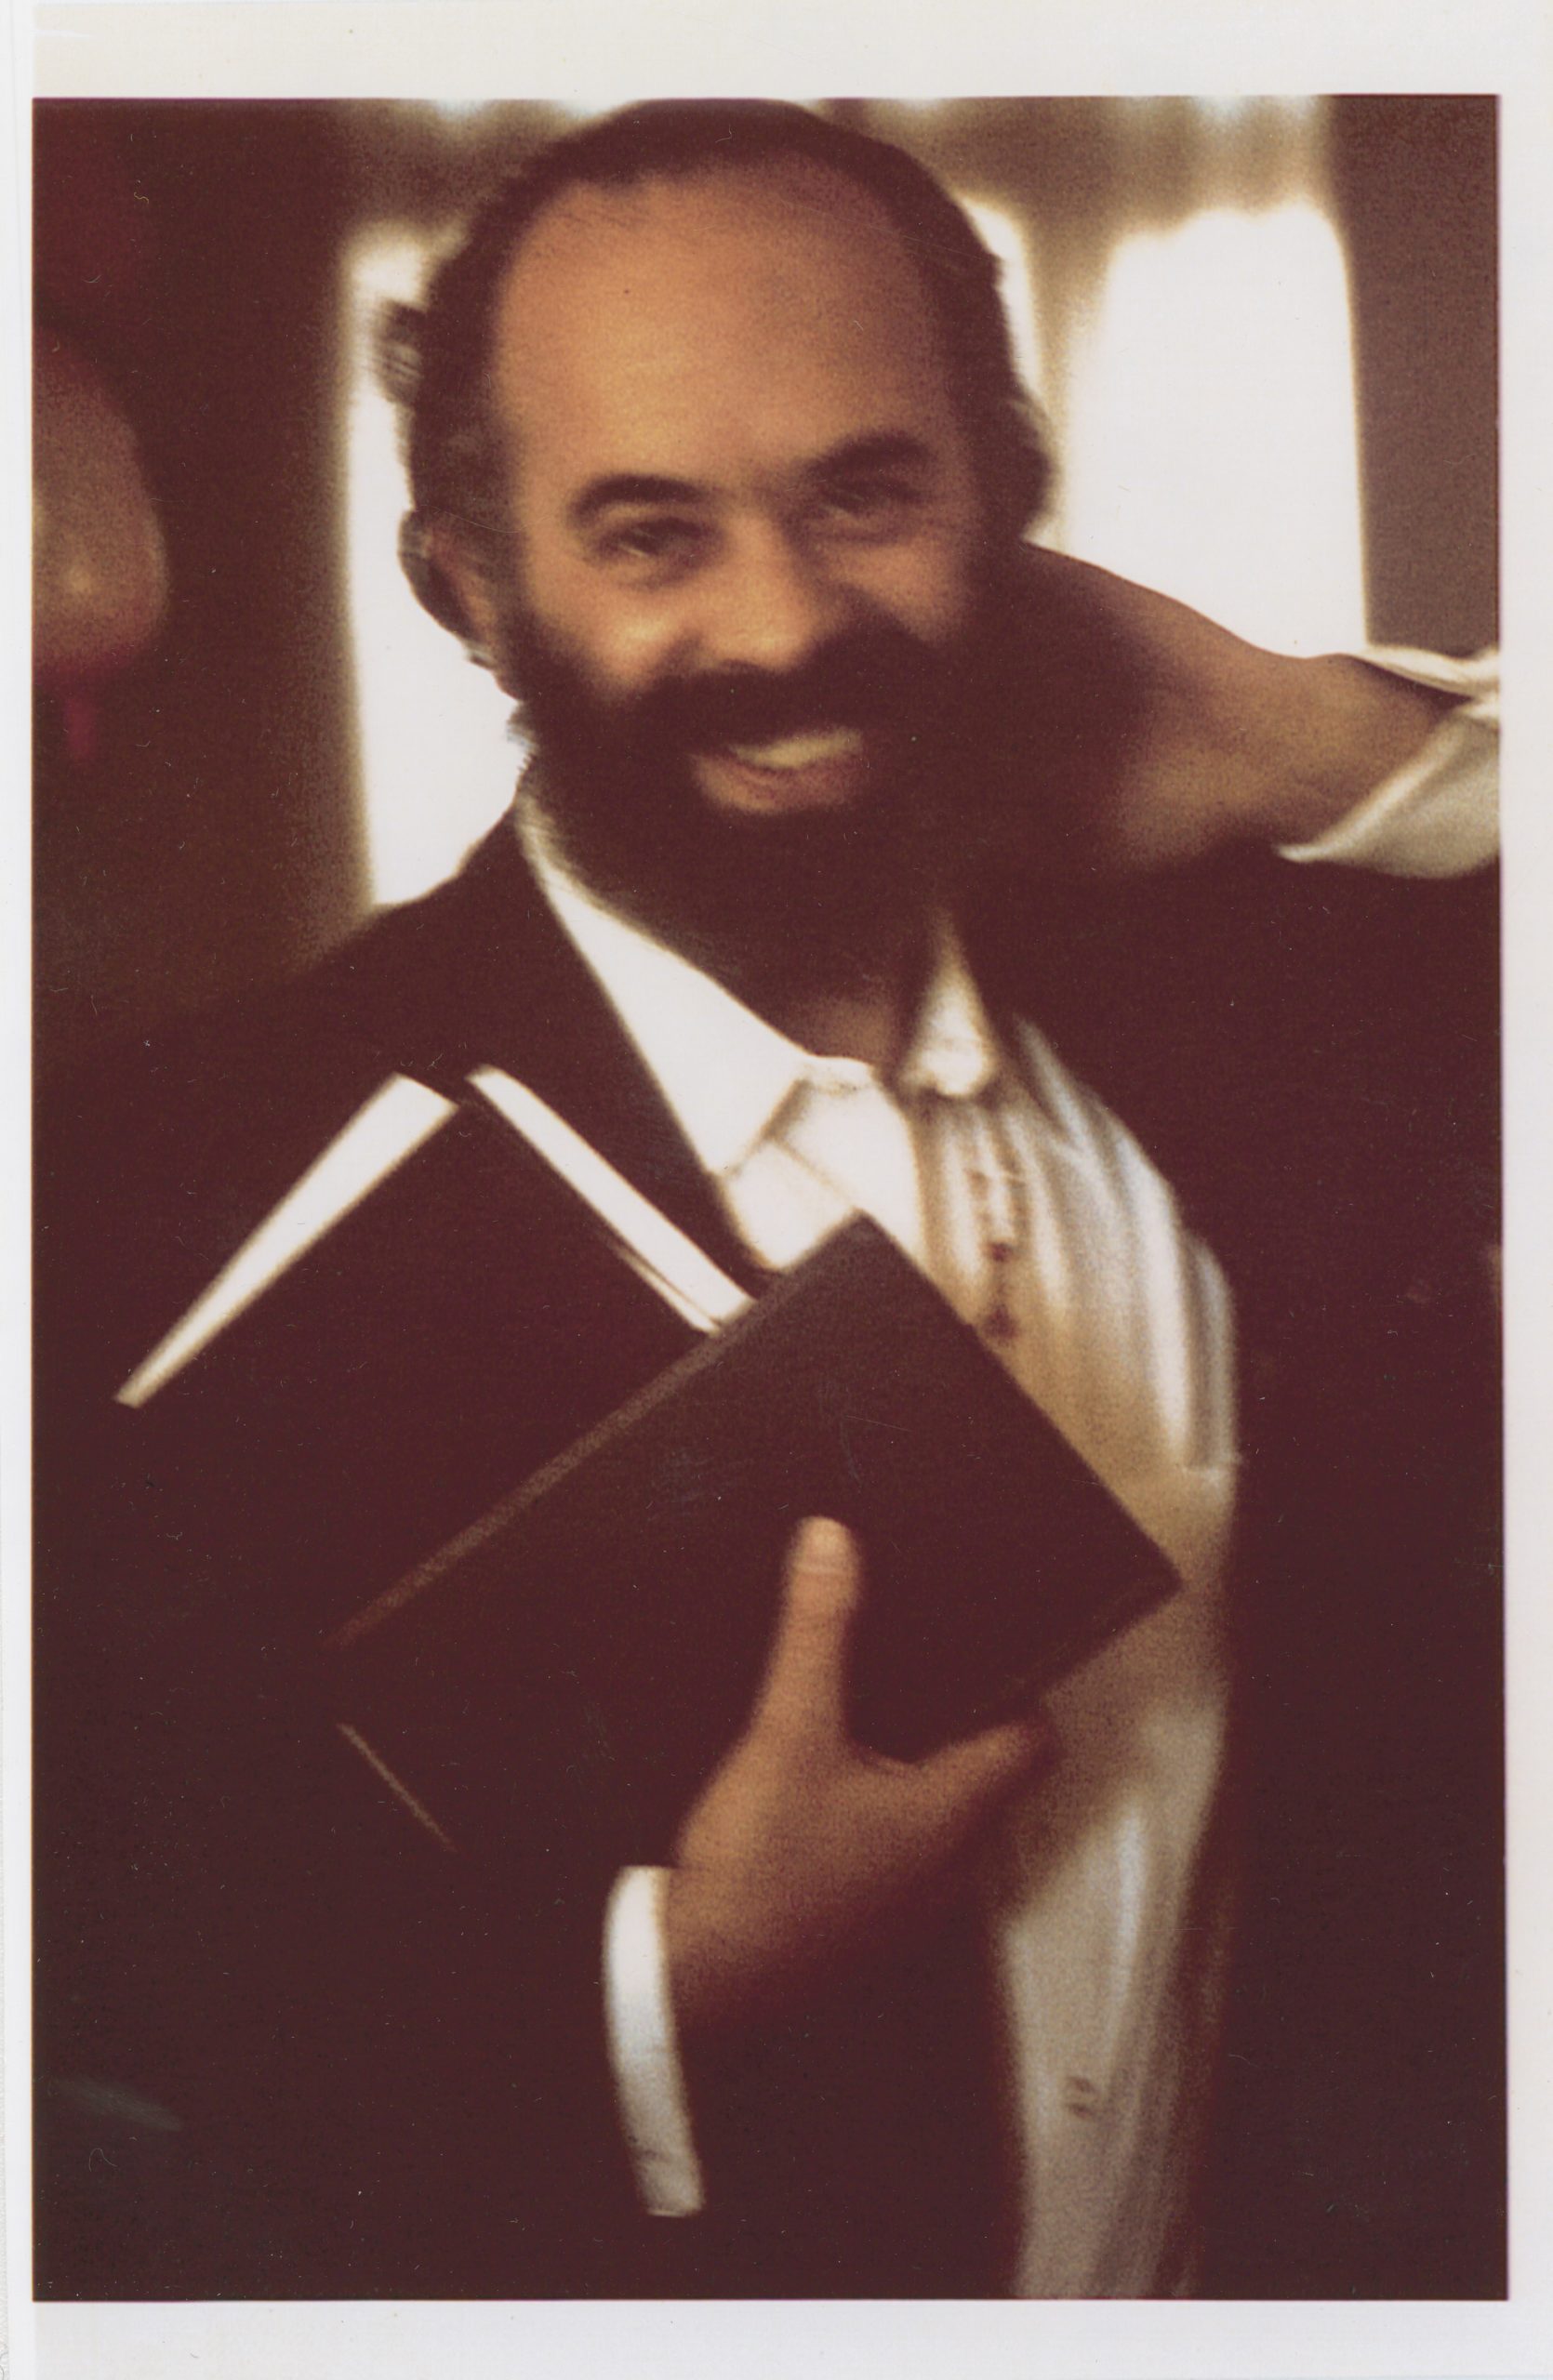 A young Shlomo Carlebach at the House of Love and Prayer, circa 1968. Photo by Marvin Kussoy, courtesy of Yehudit and Reuven Goldfarb.